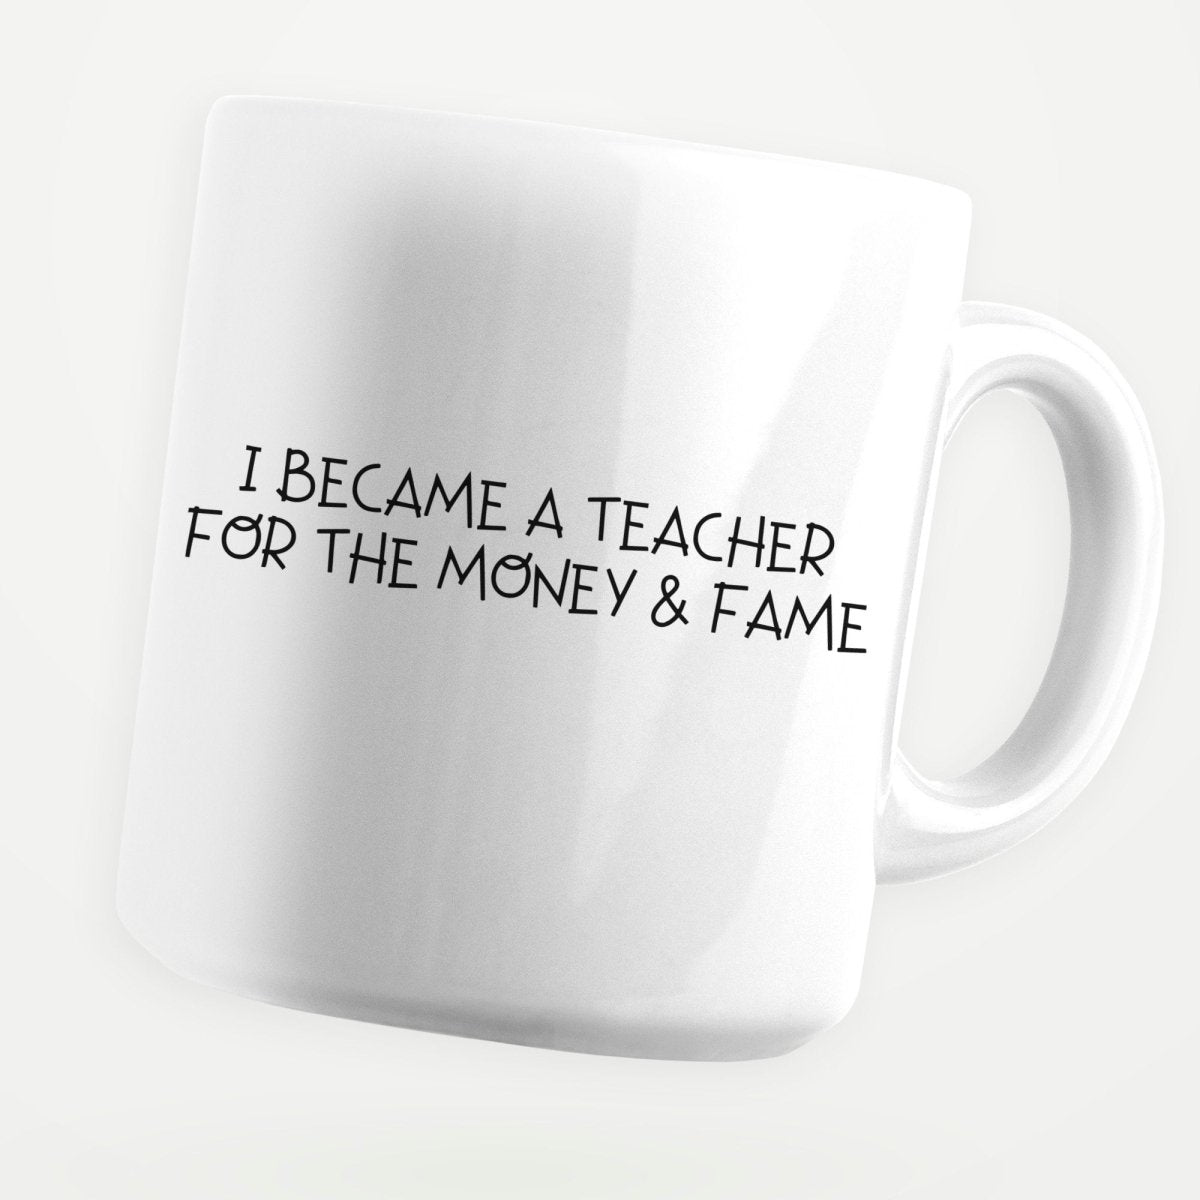 Became A Teacher For Money And Fame 11oz Coffee Mug - stickerbullBecame A Teacher For Money And Fame 11oz Coffee MugMugsstickerbullstickerbullMug_BecameATeacherForMoney_FameBecame A Teacher For Money And Fame 11oz Coffee Mug